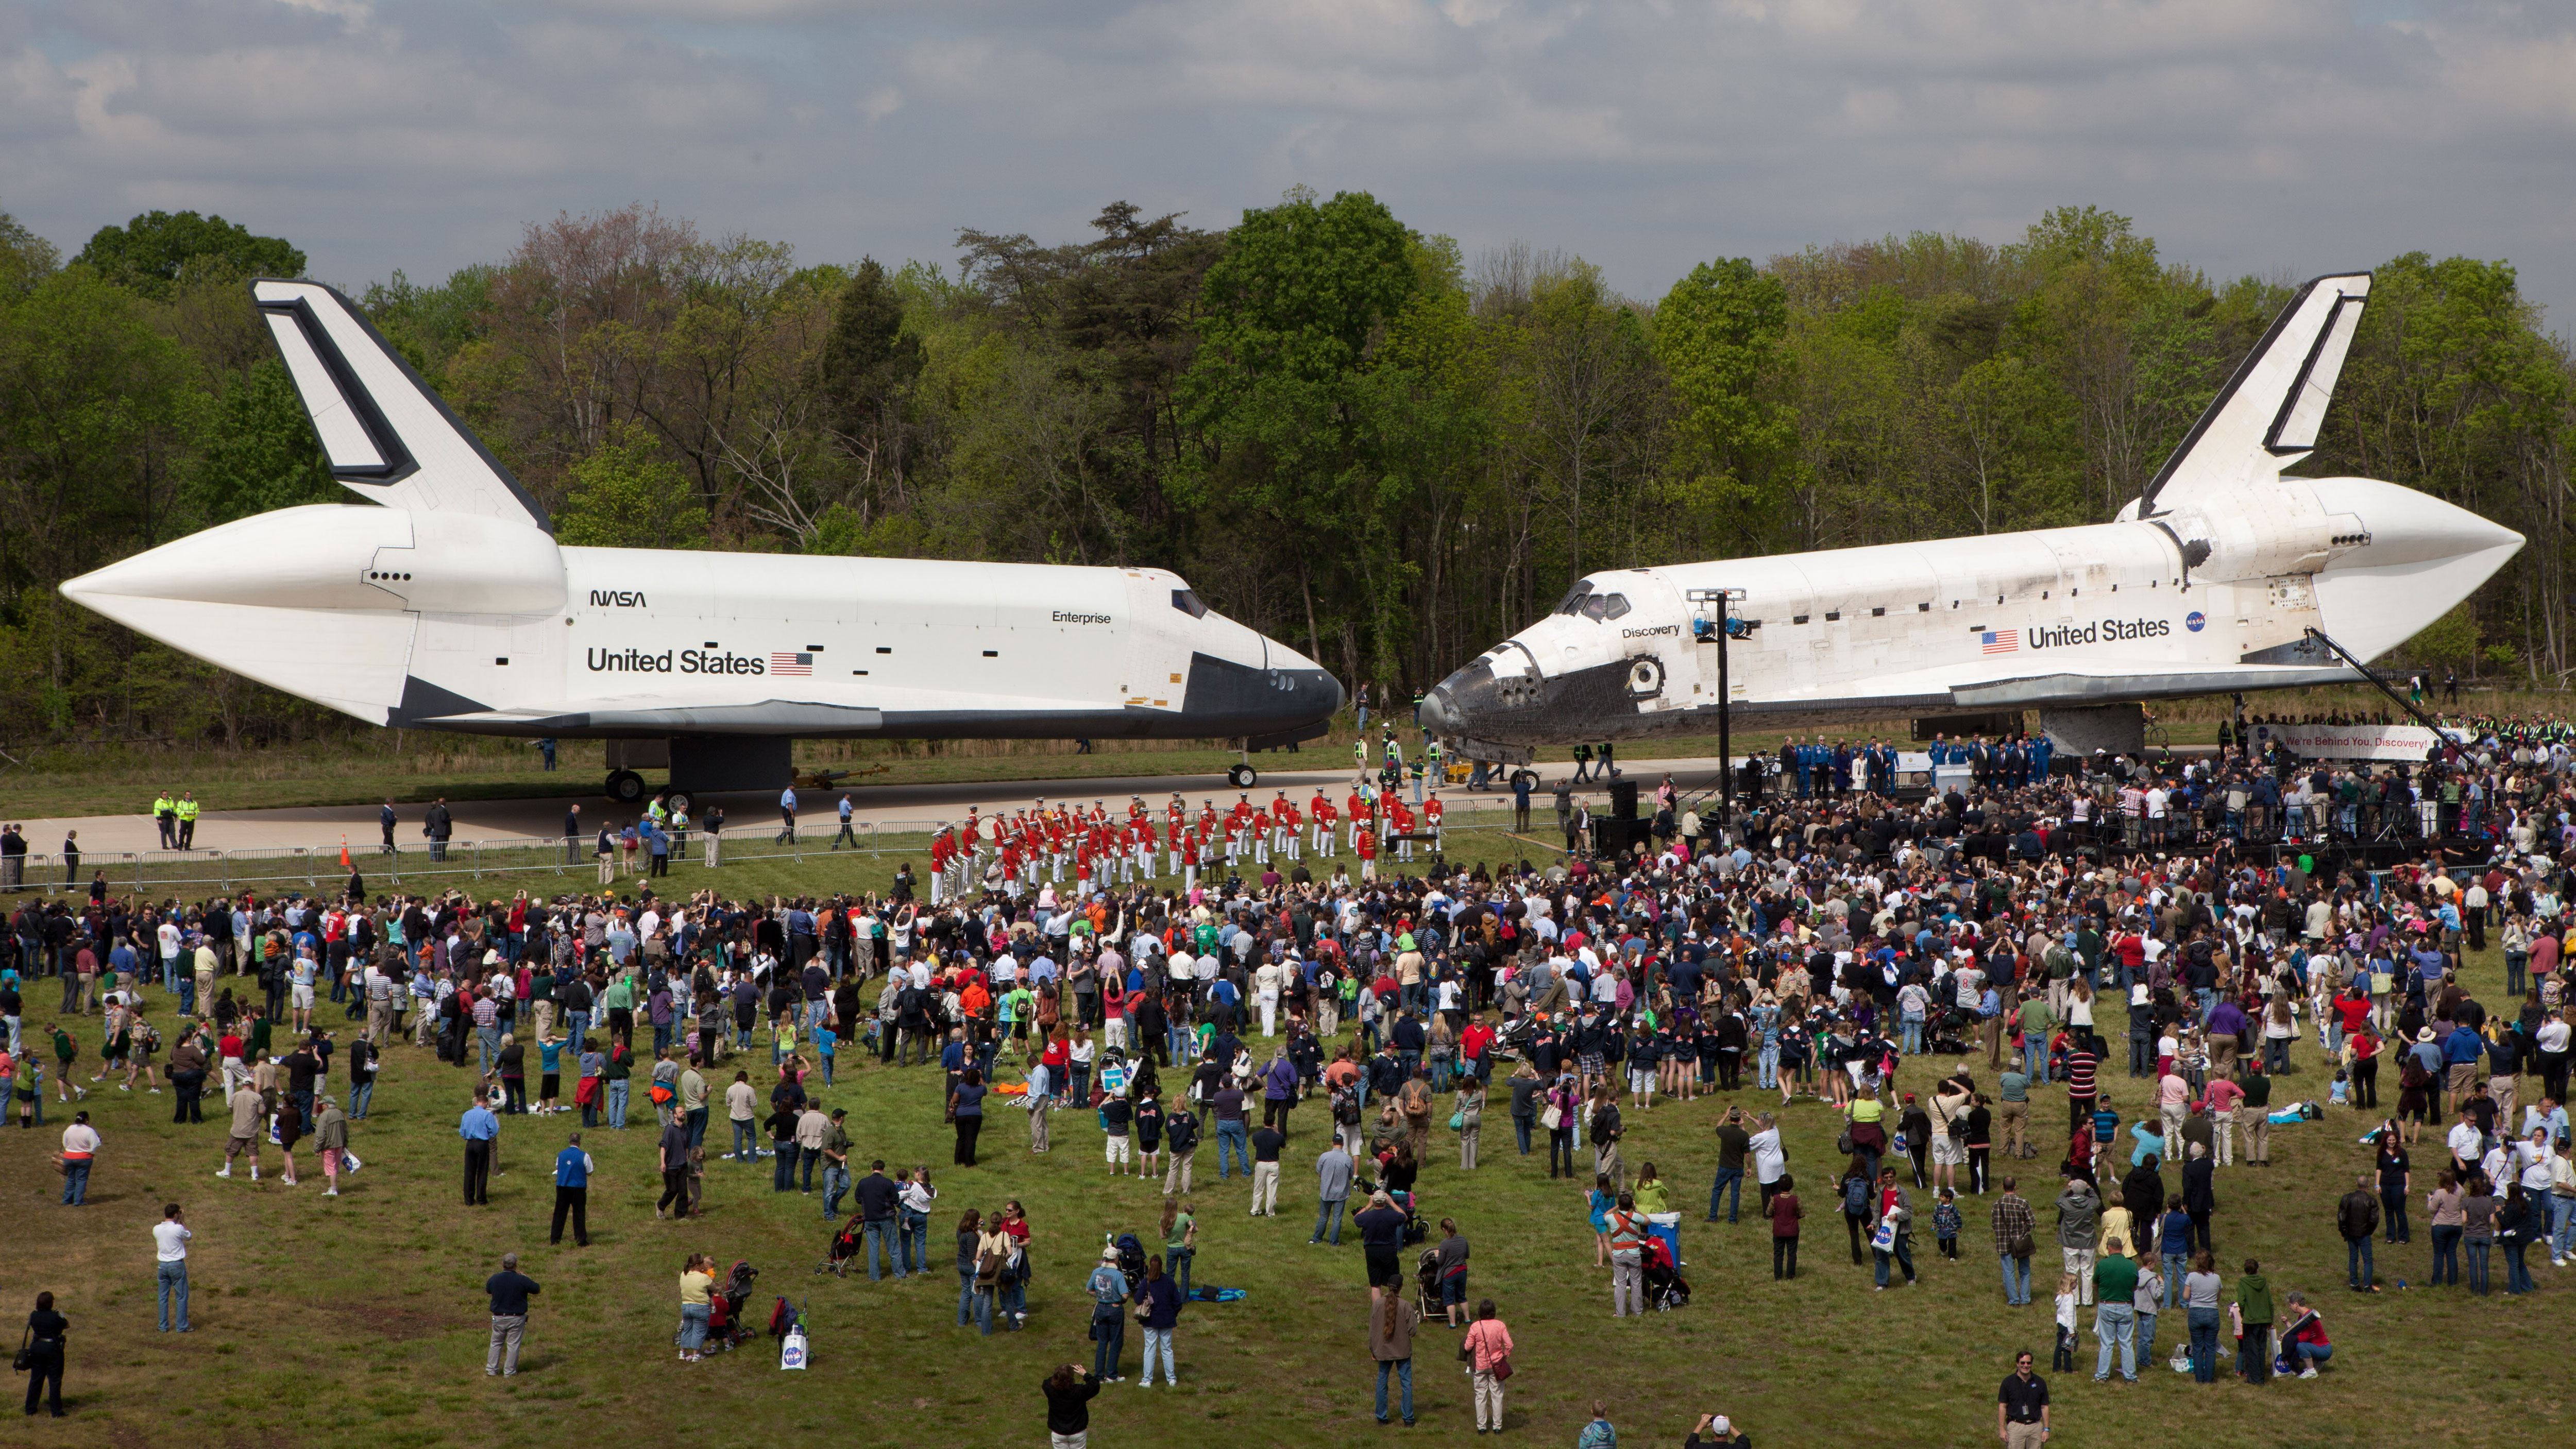 Space Shuttles Enterprise (left) and Discovery (right) sit nose to nose during the deed transfer ceremony at the Smithsonian's Steven F. Udvar-Hazy Center, Thursday on April 19, 2012. Photo: Smithsonian